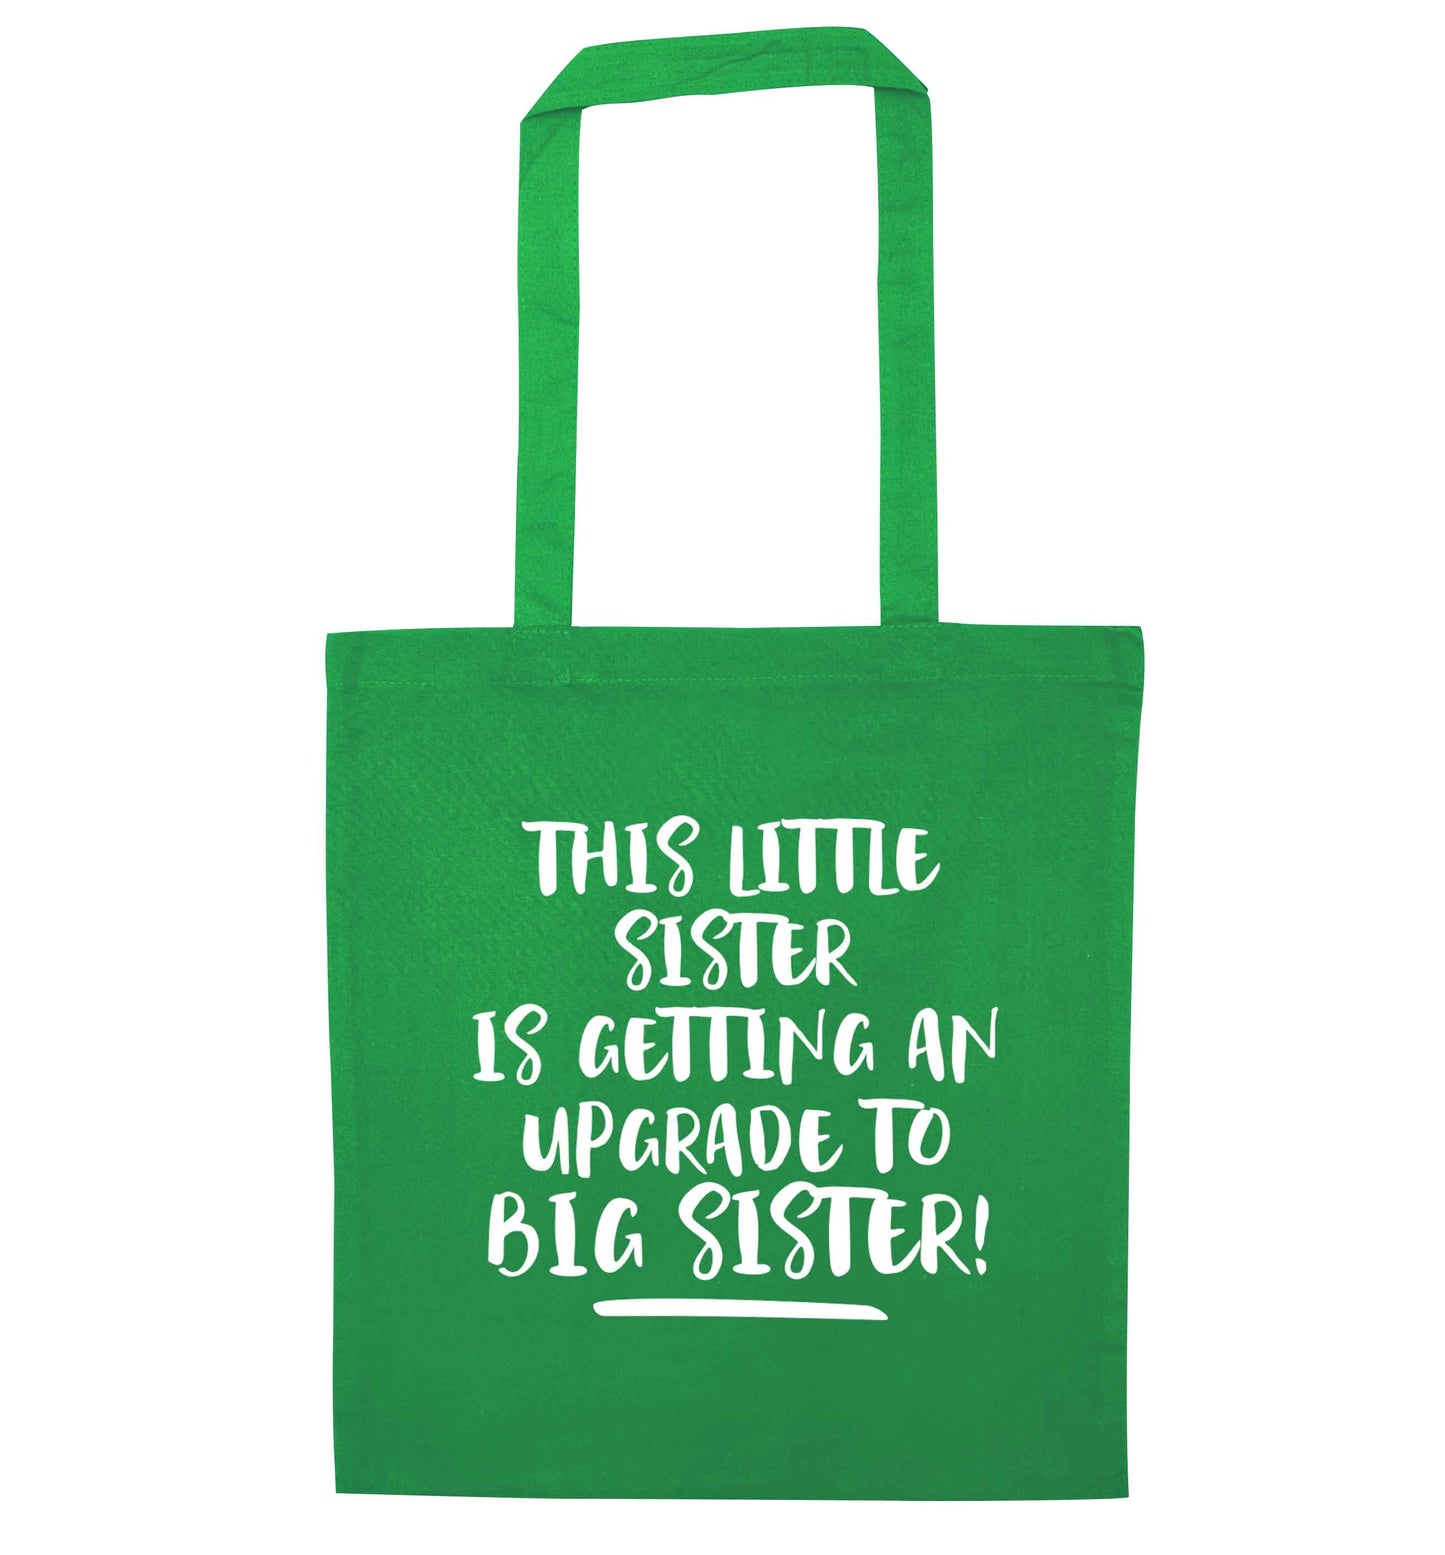 This little sister is getting an upgrade to big sister! green tote bag